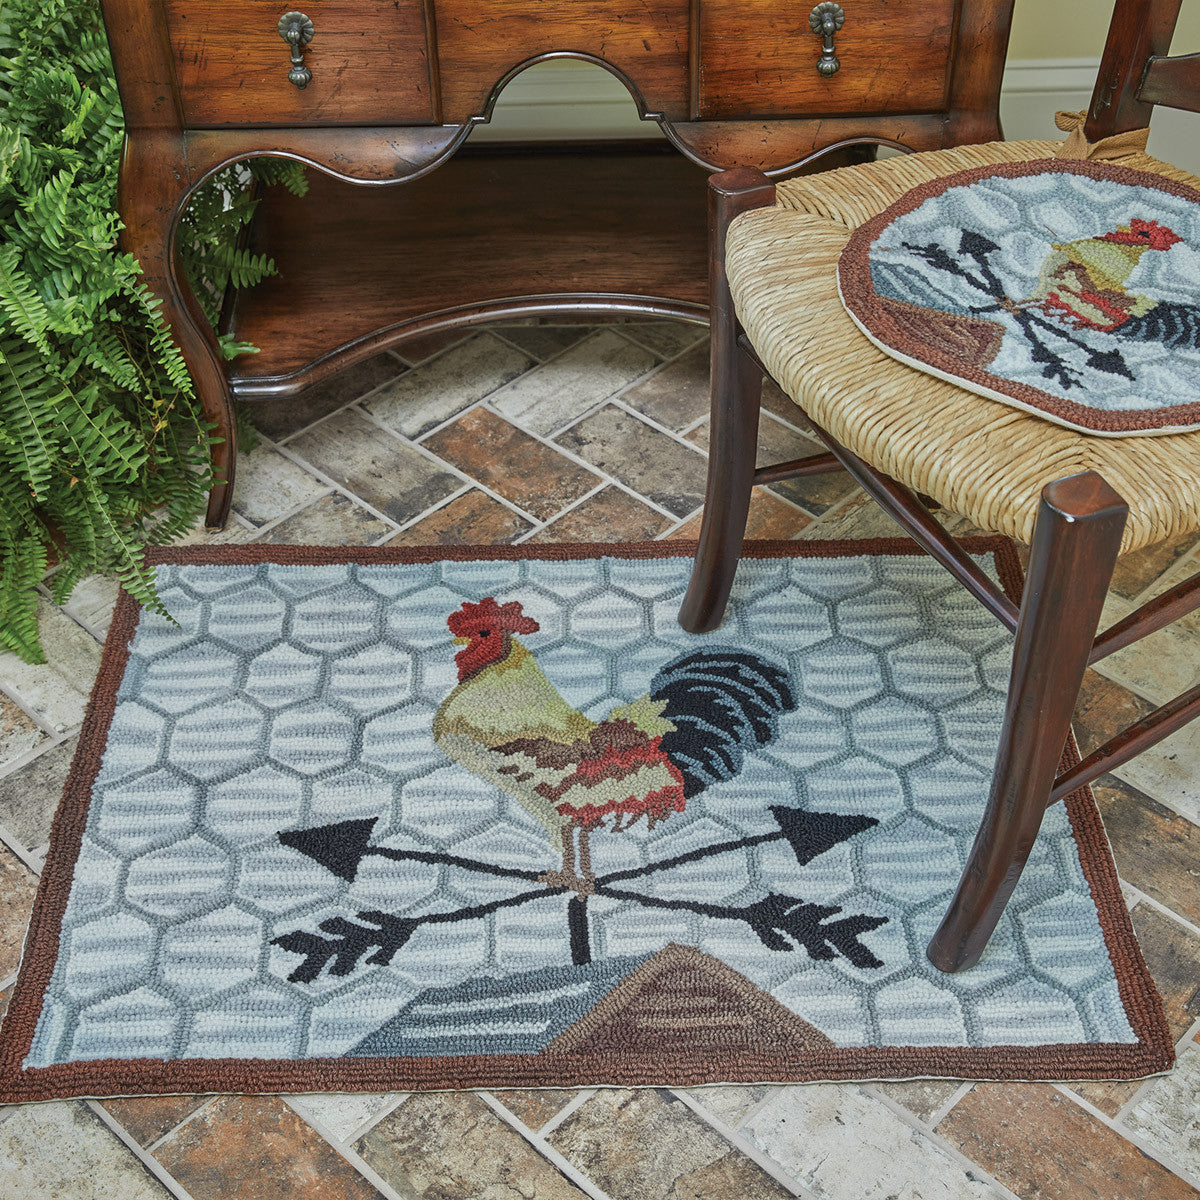 Break Of Day Rooster Hooked Rug 2'X3' - Park Designs